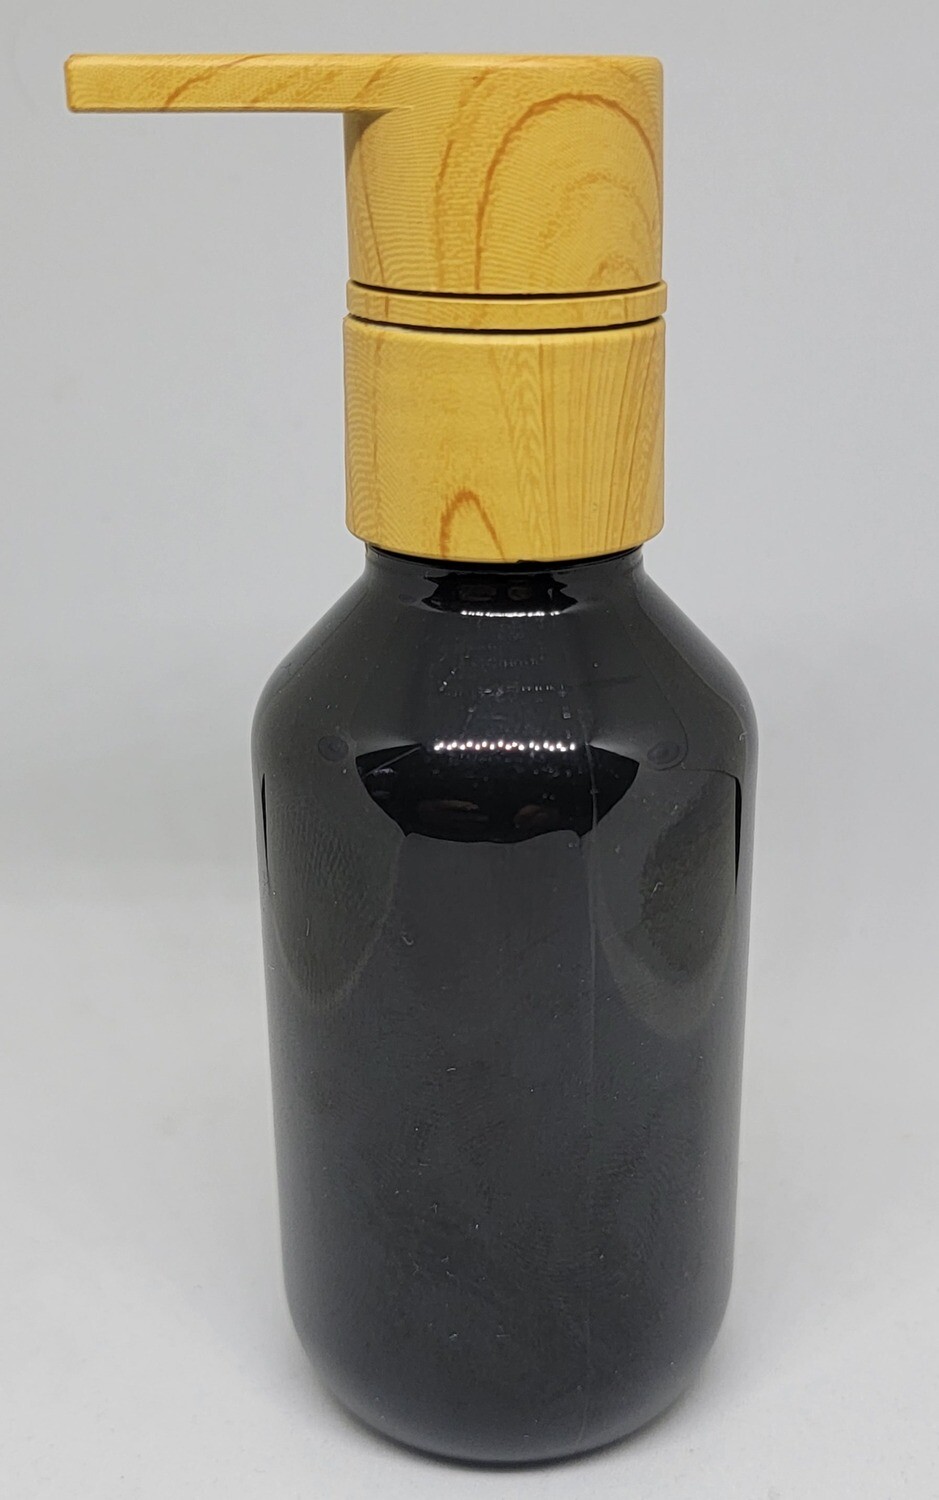 100mL Imitation Timber Lotion Pump with Black Veral PET(Plastic) Bottle